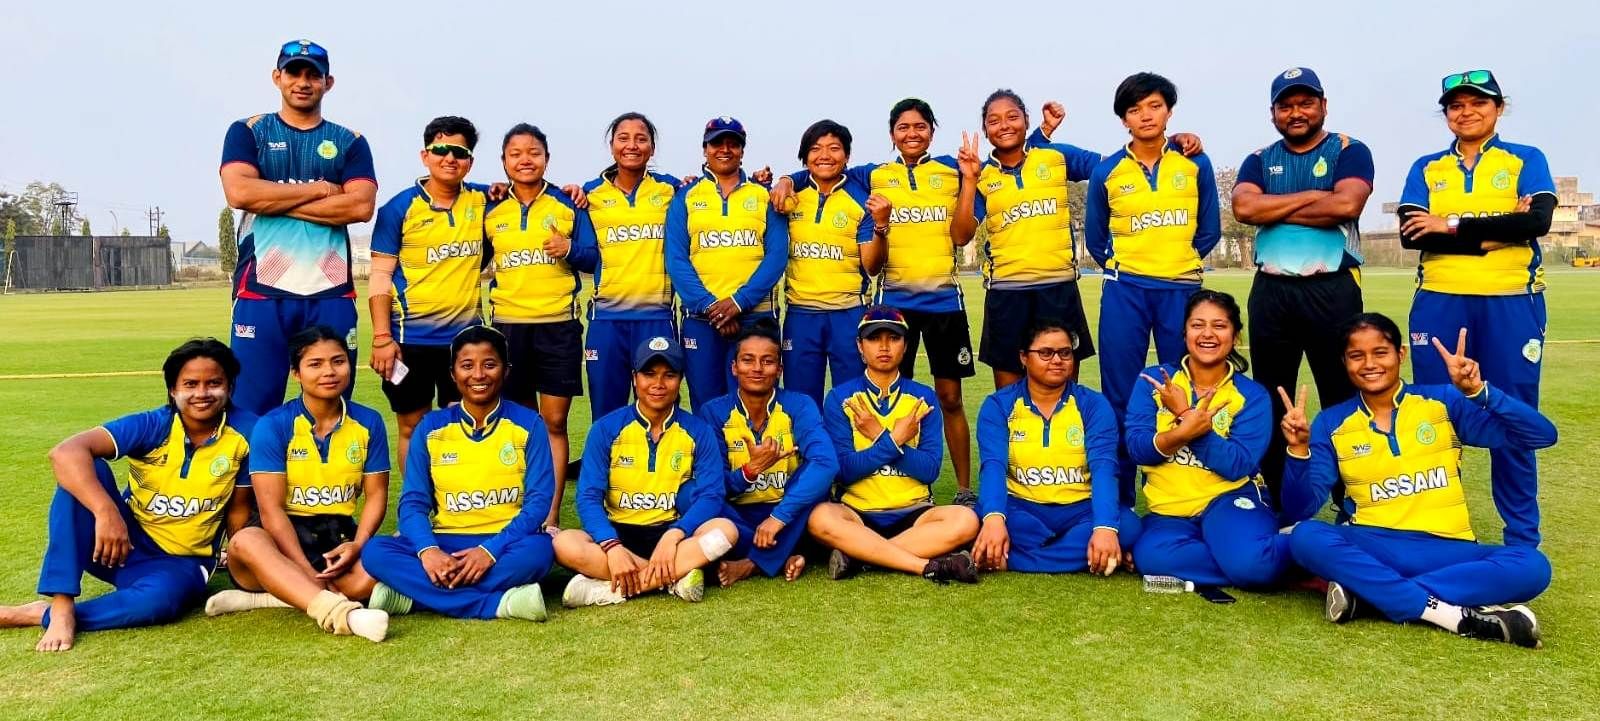 Jintimani Kalita (in the standing row, fourth from right) with her team Assam Women